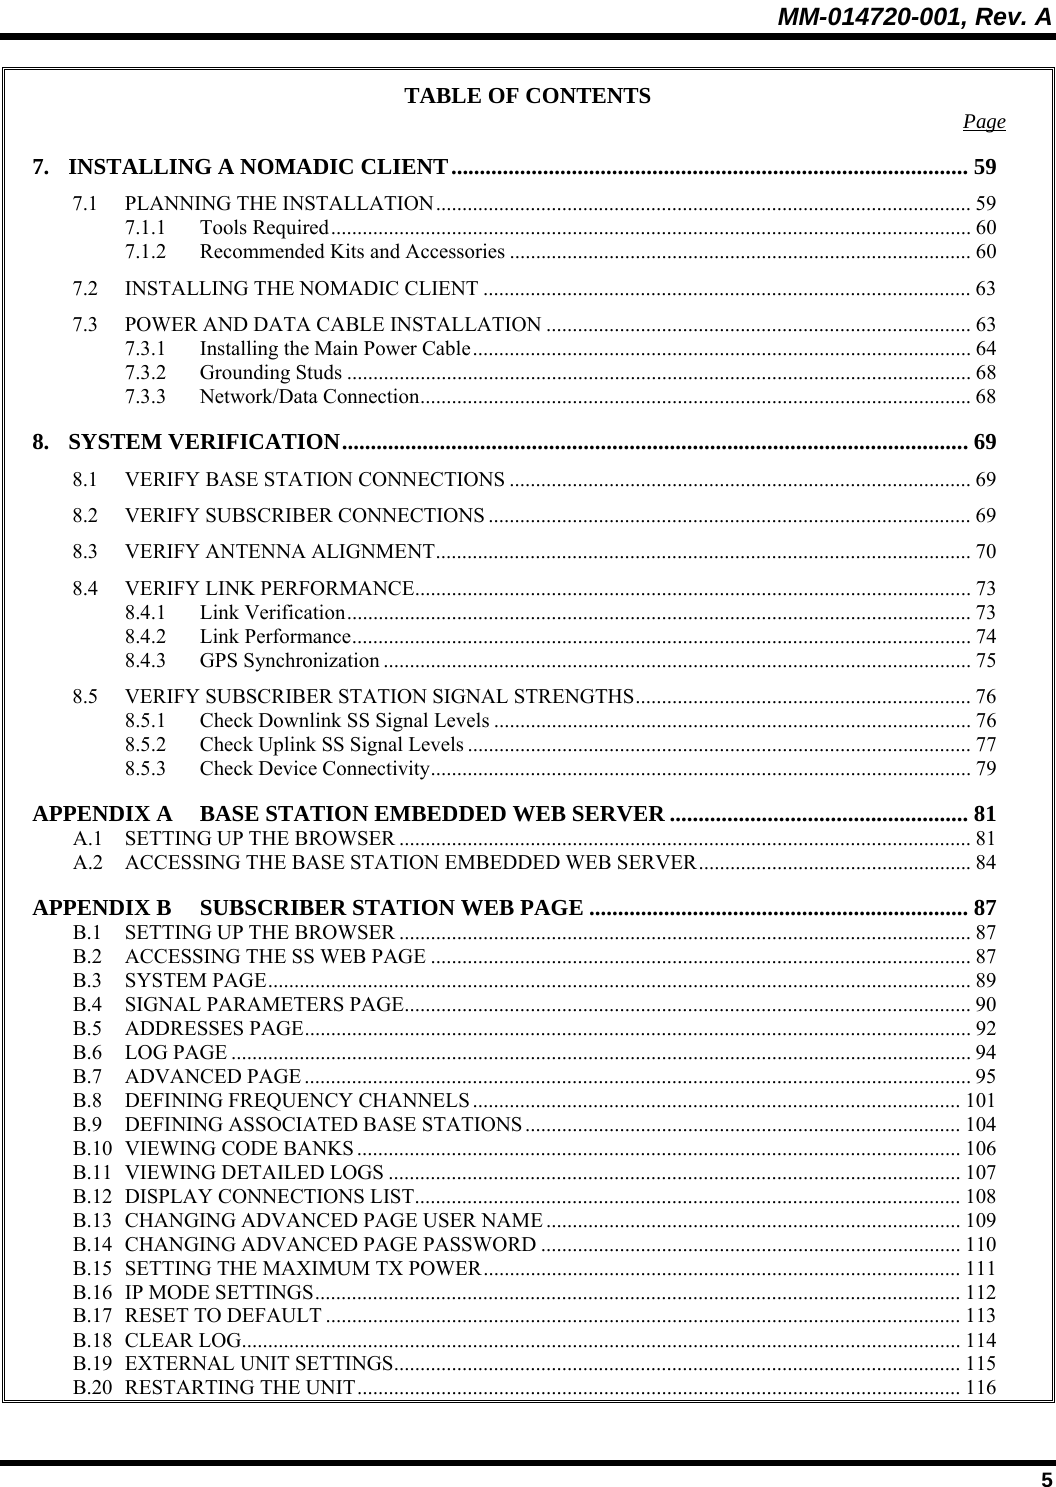 MM-014720-001, Rev. A  5 TABLE OF CONTENTS  Page 7. INSTALLING A NOMADIC CLIENT.......................................................................................... 59 7.1 PLANNING THE INSTALLATION...................................................................................................... 59 7.1.1 Tools Required.......................................................................................................................... 60 7.1.2 Recommended Kits and Accessories ........................................................................................ 60 7.2 INSTALLING THE NOMADIC CLIENT ............................................................................................. 63 7.3 POWER AND DATA CABLE INSTALLATION ................................................................................. 63 7.3.1 Installing the Main Power Cable............................................................................................... 64 7.3.2 Grounding Studs ....................................................................................................................... 68 7.3.3 Network/Data Connection.........................................................................................................68 8. SYSTEM VERIFICATION.............................................................................................................69 8.1 VERIFY BASE STATION CONNECTIONS ........................................................................................ 69 8.2 VERIFY SUBSCRIBER CONNECTIONS ............................................................................................ 69 8.3 VERIFY ANTENNA ALIGNMENT...................................................................................................... 70 8.4 VERIFY LINK PERFORMANCE.......................................................................................................... 73 8.4.1 Link Verification....................................................................................................................... 73 8.4.2 Link Performance...................................................................................................................... 74 8.4.3 GPS Synchronization ................................................................................................................ 75 8.5 VERIFY SUBSCRIBER STATION SIGNAL STRENGTHS................................................................ 76 8.5.1 Check Downlink SS Signal Levels ........................................................................................... 76 8.5.2 Check Uplink SS Signal Levels ................................................................................................ 77 8.5.3 Check Device Connectivity.......................................................................................................79 APPENDIX A BASE STATION EMBEDDED WEB SERVER .................................................... 81 A.1 SETTING UP THE BROWSER ............................................................................................................. 81 A.2 ACCESSING THE BASE STATION EMBEDDED WEB SERVER.................................................... 84 APPENDIX B SUBSCRIBER STATION WEB PAGE .................................................................. 87 B.1 SETTING UP THE BROWSER ............................................................................................................. 87 B.2 ACCESSING THE SS WEB PAGE .......................................................................................................87 B.3 SYSTEM PAGE...................................................................................................................................... 89 B.4 SIGNAL PARAMETERS PAGE............................................................................................................ 90 B.5 ADDRESSES PAGE............................................................................................................................... 92 B.6 LOG PAGE ............................................................................................................................................. 94 B.7 ADVANCED PAGE ............................................................................................................................... 95 B.8 DEFINING FREQUENCY CHANNELS............................................................................................. 101 B.9 DEFINING ASSOCIATED BASE STATIONS ................................................................................... 104 B.10 VIEWING CODE BANKS ................................................................................................................... 106 B.11 VIEWING DETAILED LOGS ............................................................................................................. 107 B.12 DISPLAY CONNECTIONS LIST........................................................................................................108 B.13 CHANGING ADVANCED PAGE USER NAME ............................................................................... 109 B.14 CHANGING ADVANCED PAGE PASSWORD ................................................................................ 110 B.15 SETTING THE MAXIMUM TX POWER........................................................................................... 111 B.16 IP MODE SETTINGS........................................................................................................................... 112 B.17 RESET TO DEFAULT ......................................................................................................................... 113 B.18 CLEAR LOG......................................................................................................................................... 114 B.19 EXTERNAL UNIT SETTINGS............................................................................................................ 115 B.20 RESTARTING THE UNIT................................................................................................................... 116 